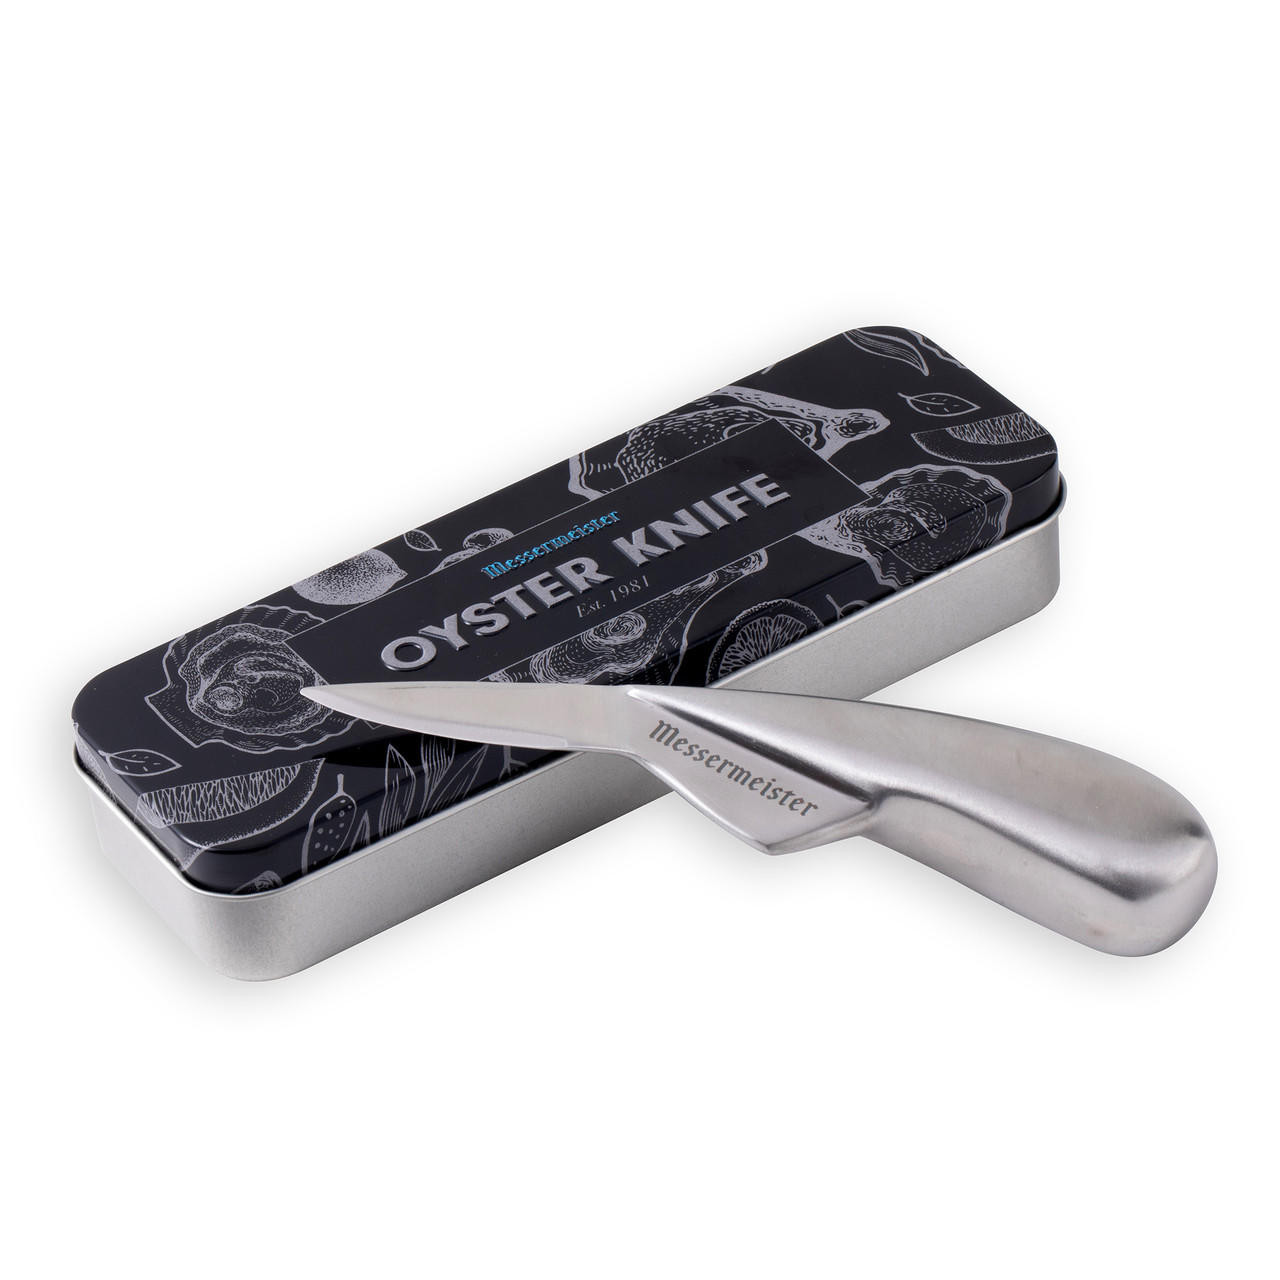 https://cdn11.bigcommerce.com/s-k3c8jdz2s4/images/stencil/1280x1280/products/3200/6808/messermeister-6.5-inch-oyster-knife__30471.1686634928.jpg?c=1